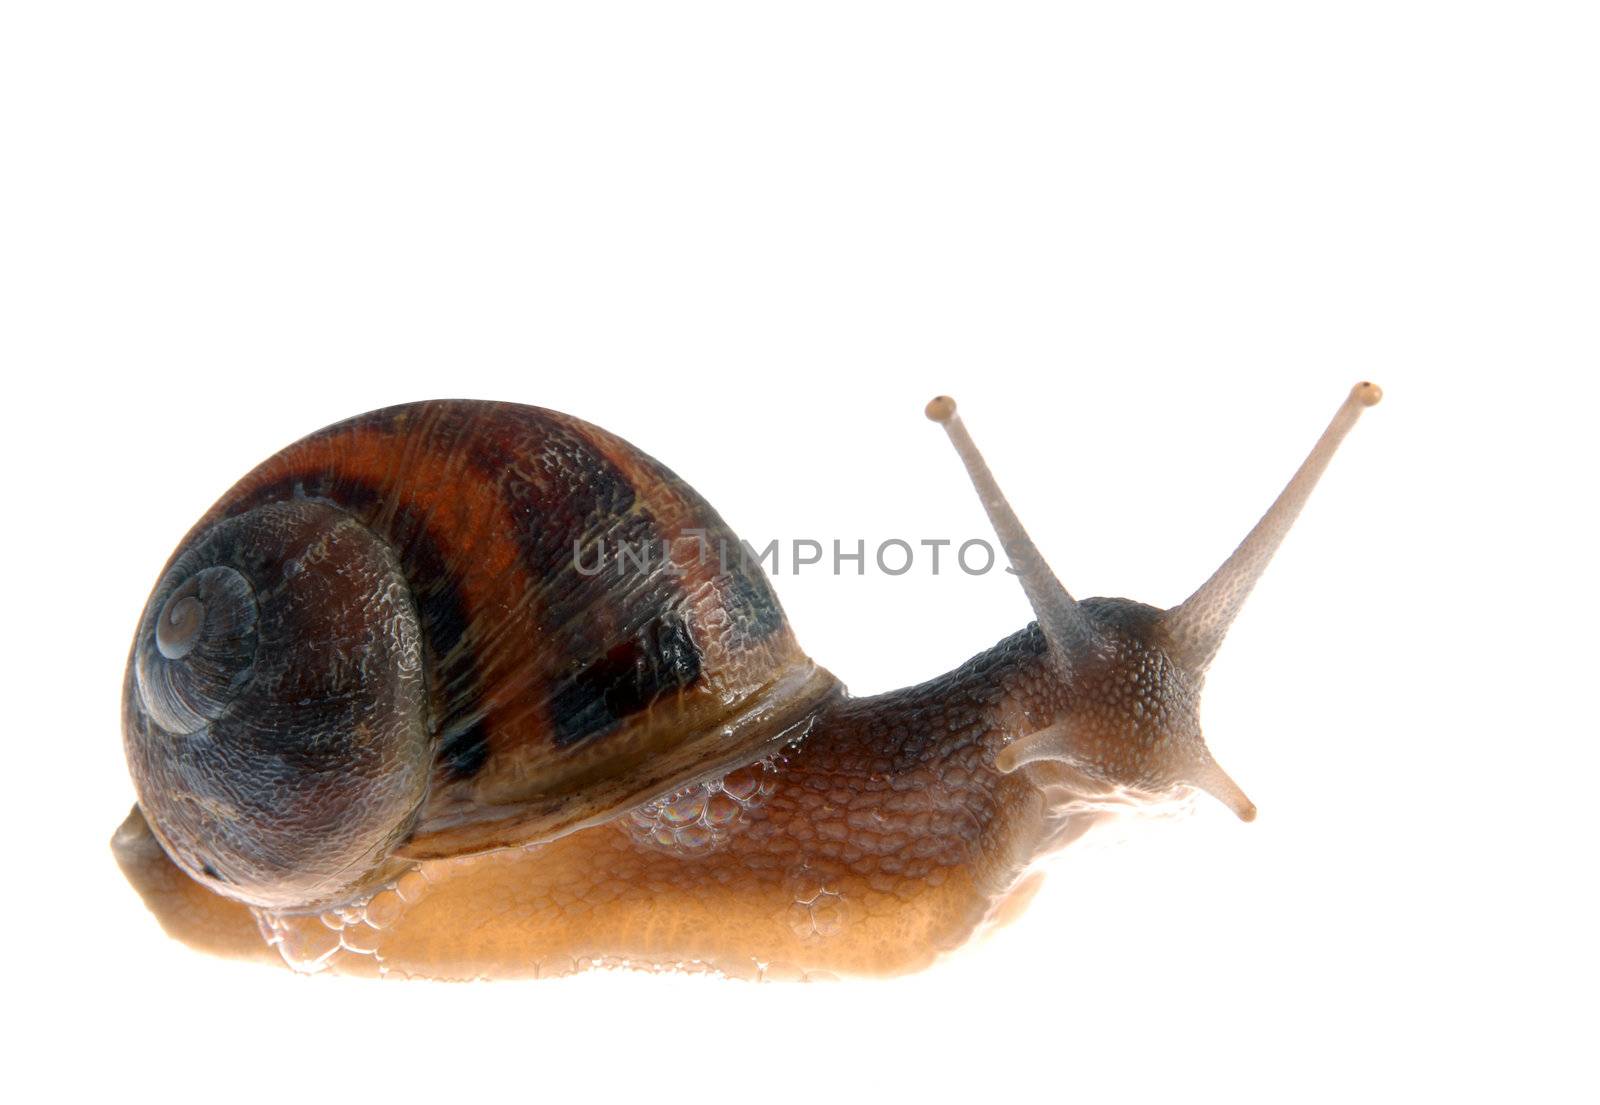 Snail isolated over white curiously looking at the camera.